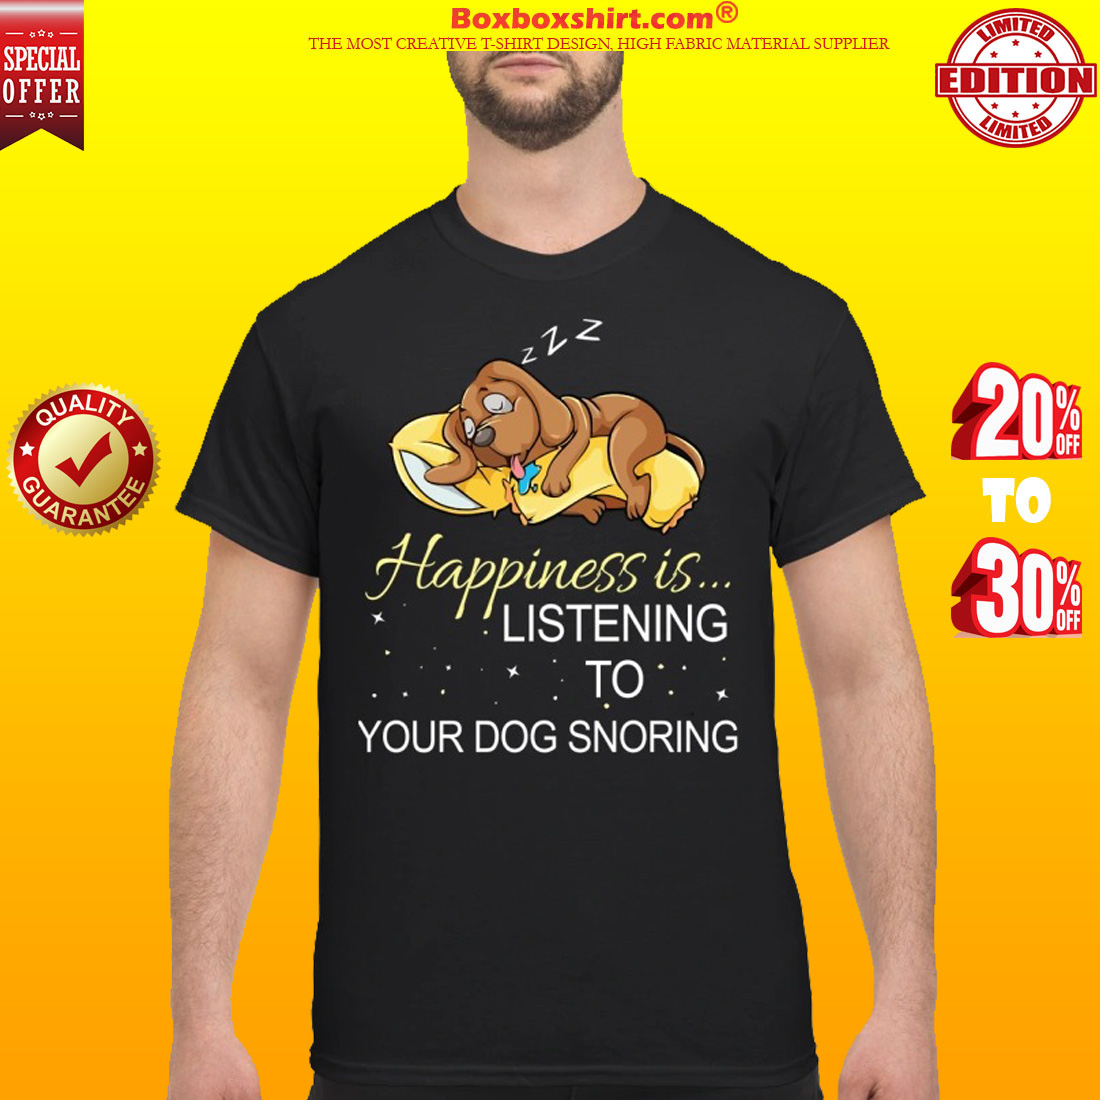 Happiness is listening to your dog snoring classic shirt